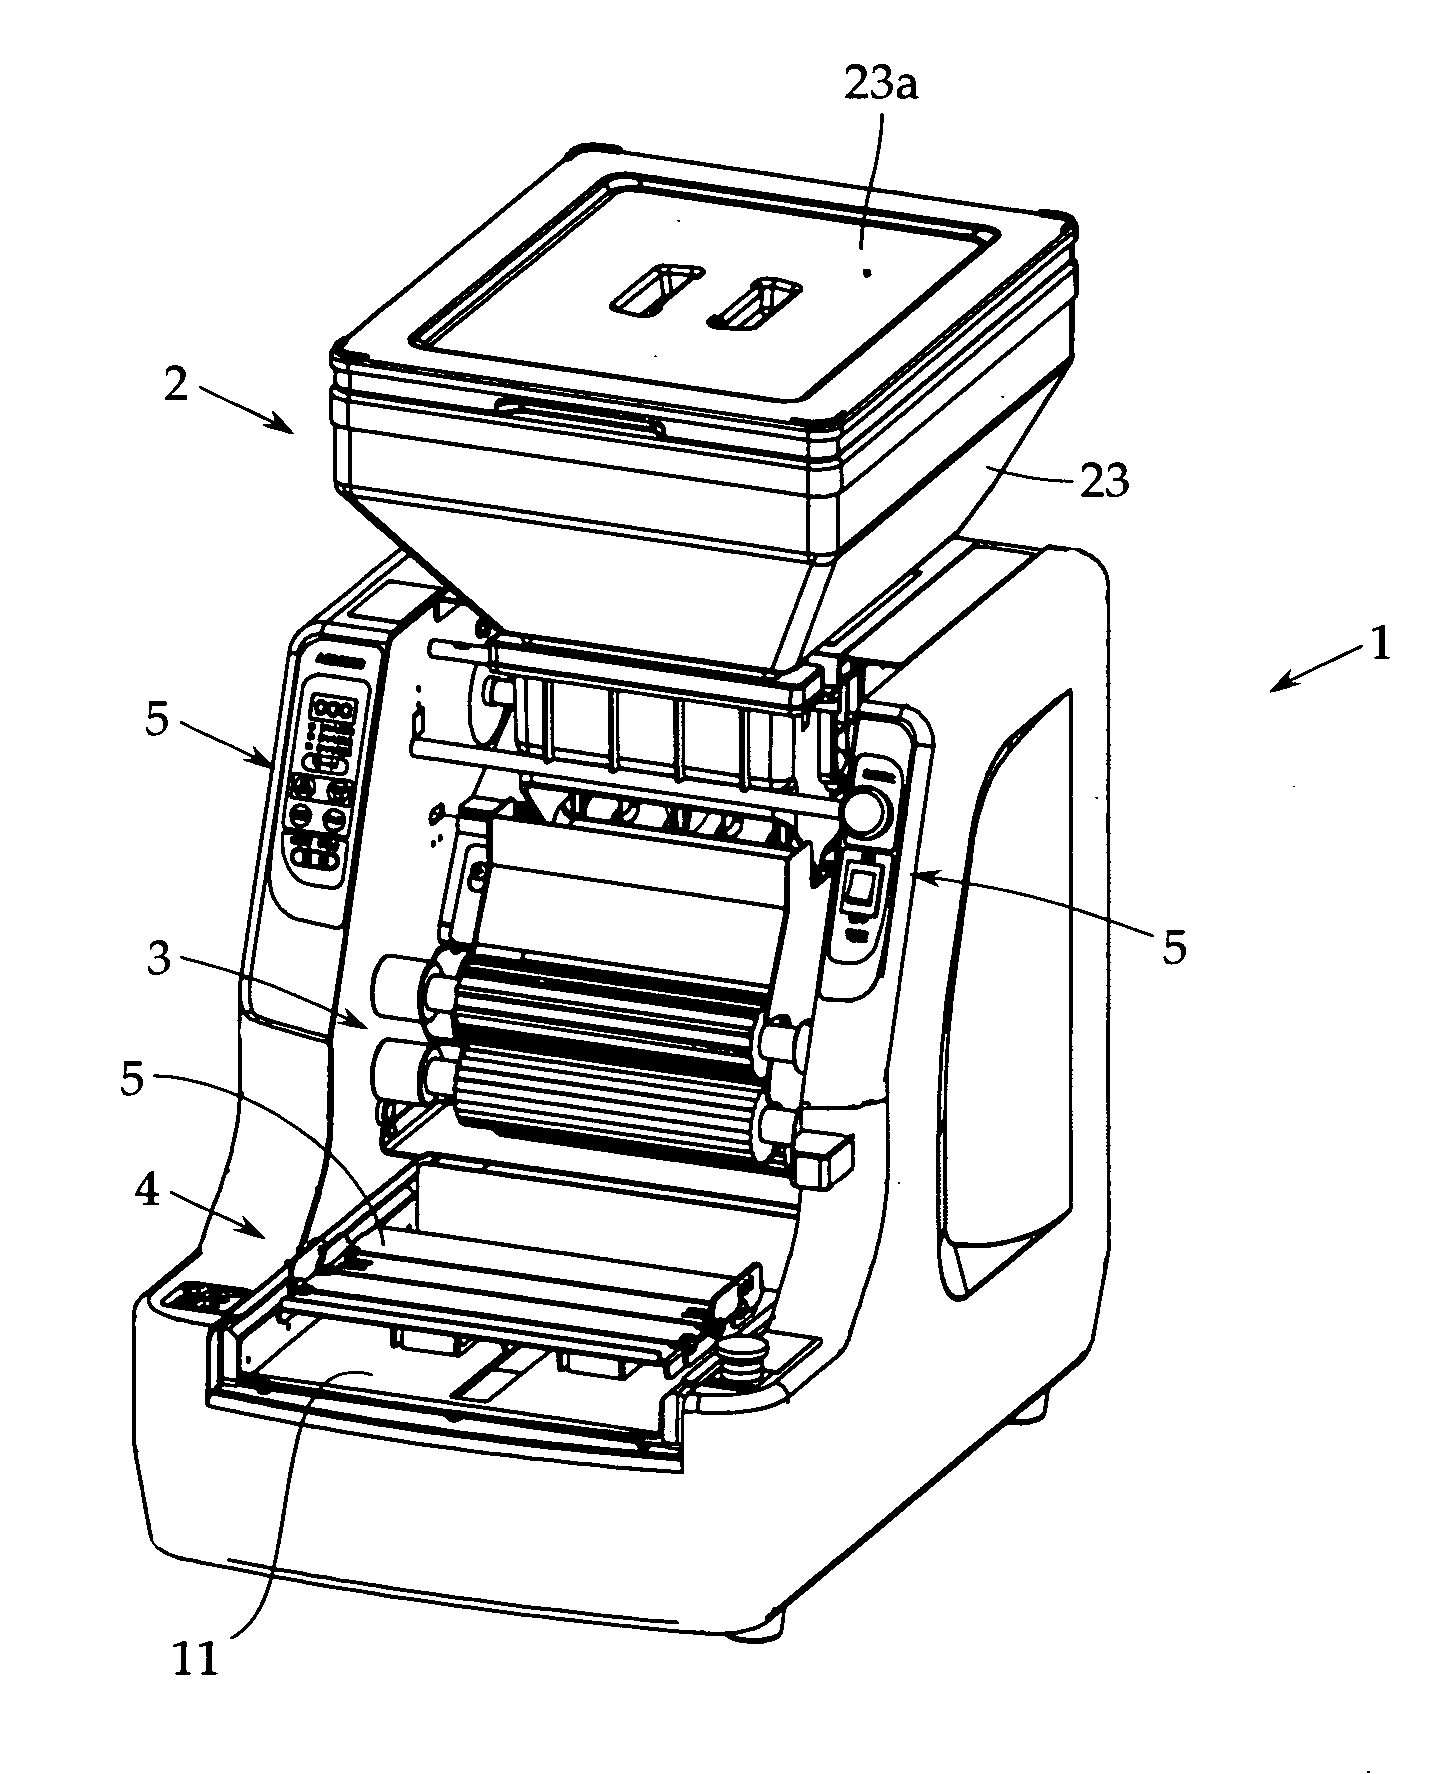 Cooked rice mold apparatus